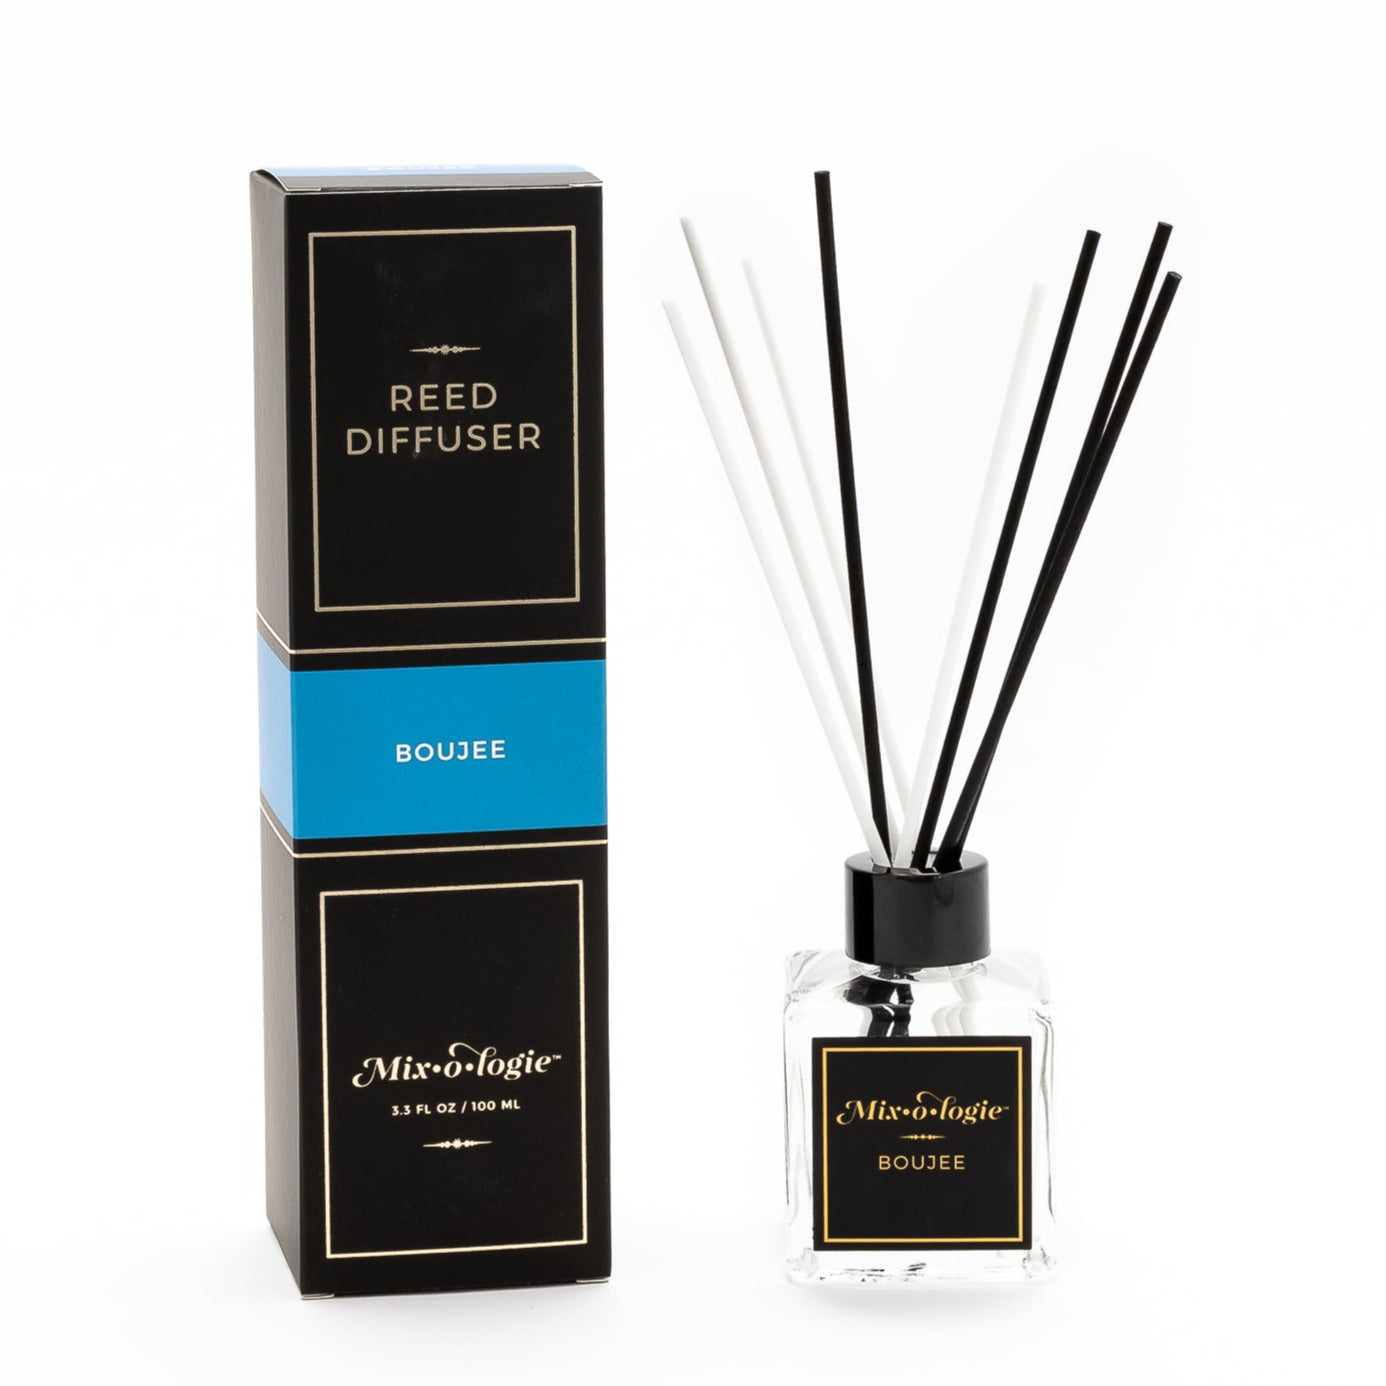 Mixologie Boujee scented Reed Diffuser with 8 reed diffuser sticks in 3.5 FL OZ glass square bottle.